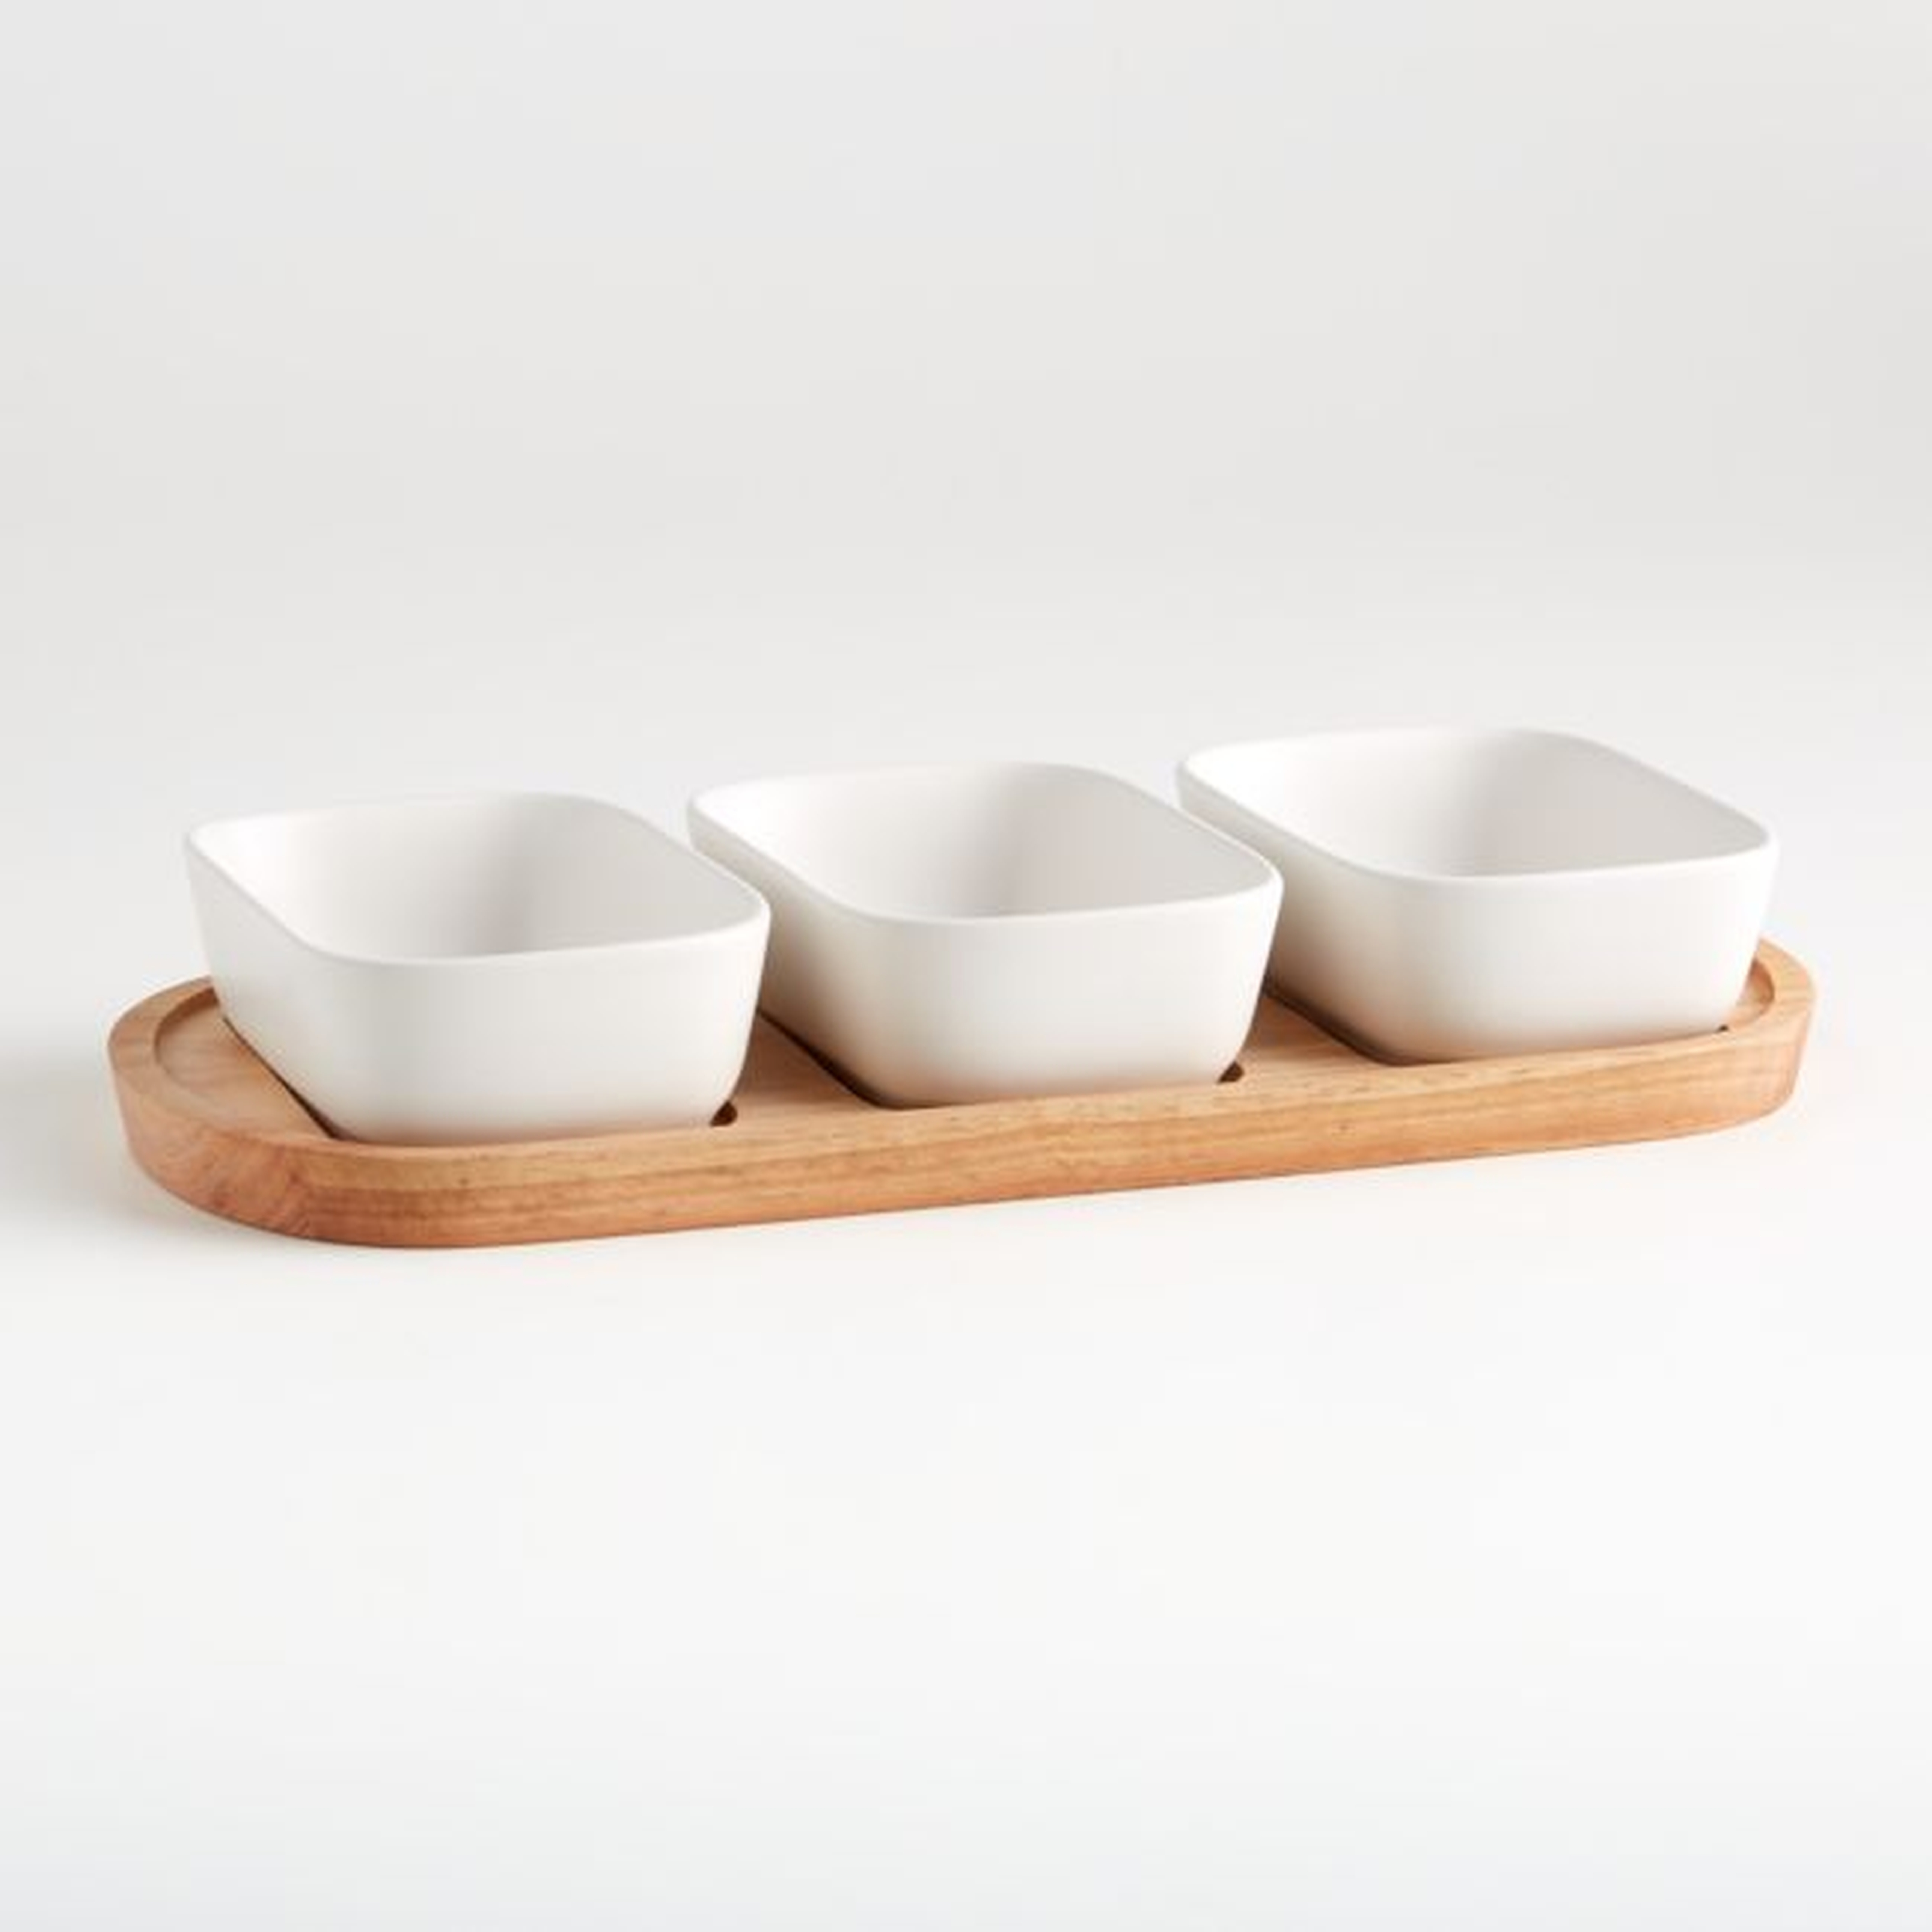 Oven-to-Table Oval Serving Bowls with Oval Platter - Crate and Barrel